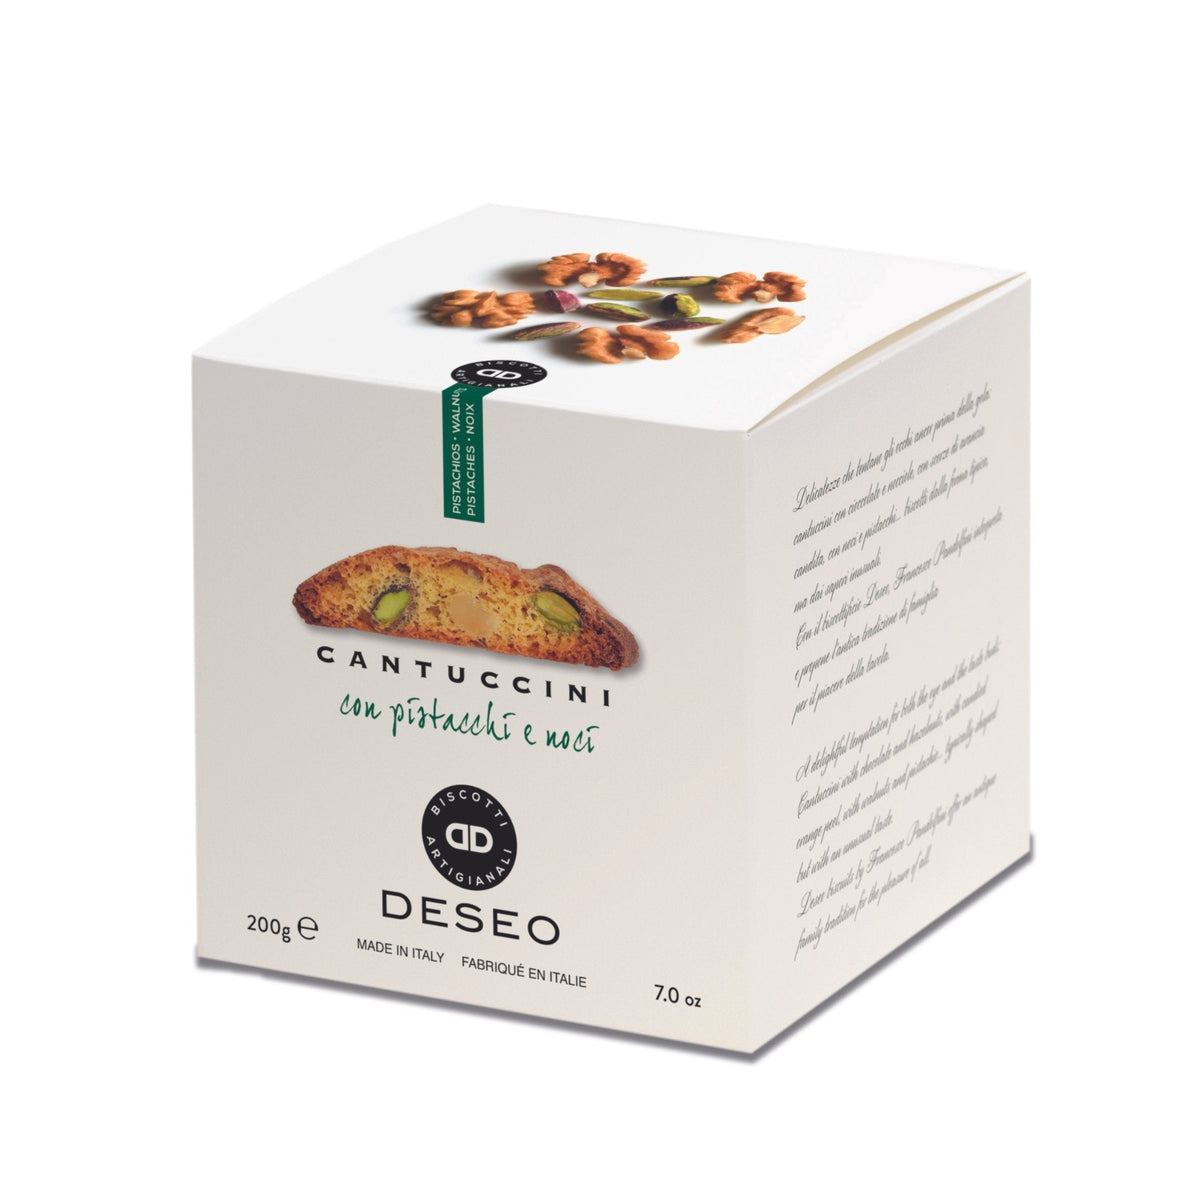 Deseo Cantuccini Toscani with Pistachios &amp; Walnuts 200g (Box)  | Imported and distributed in the UK by Just Gourmet Foods